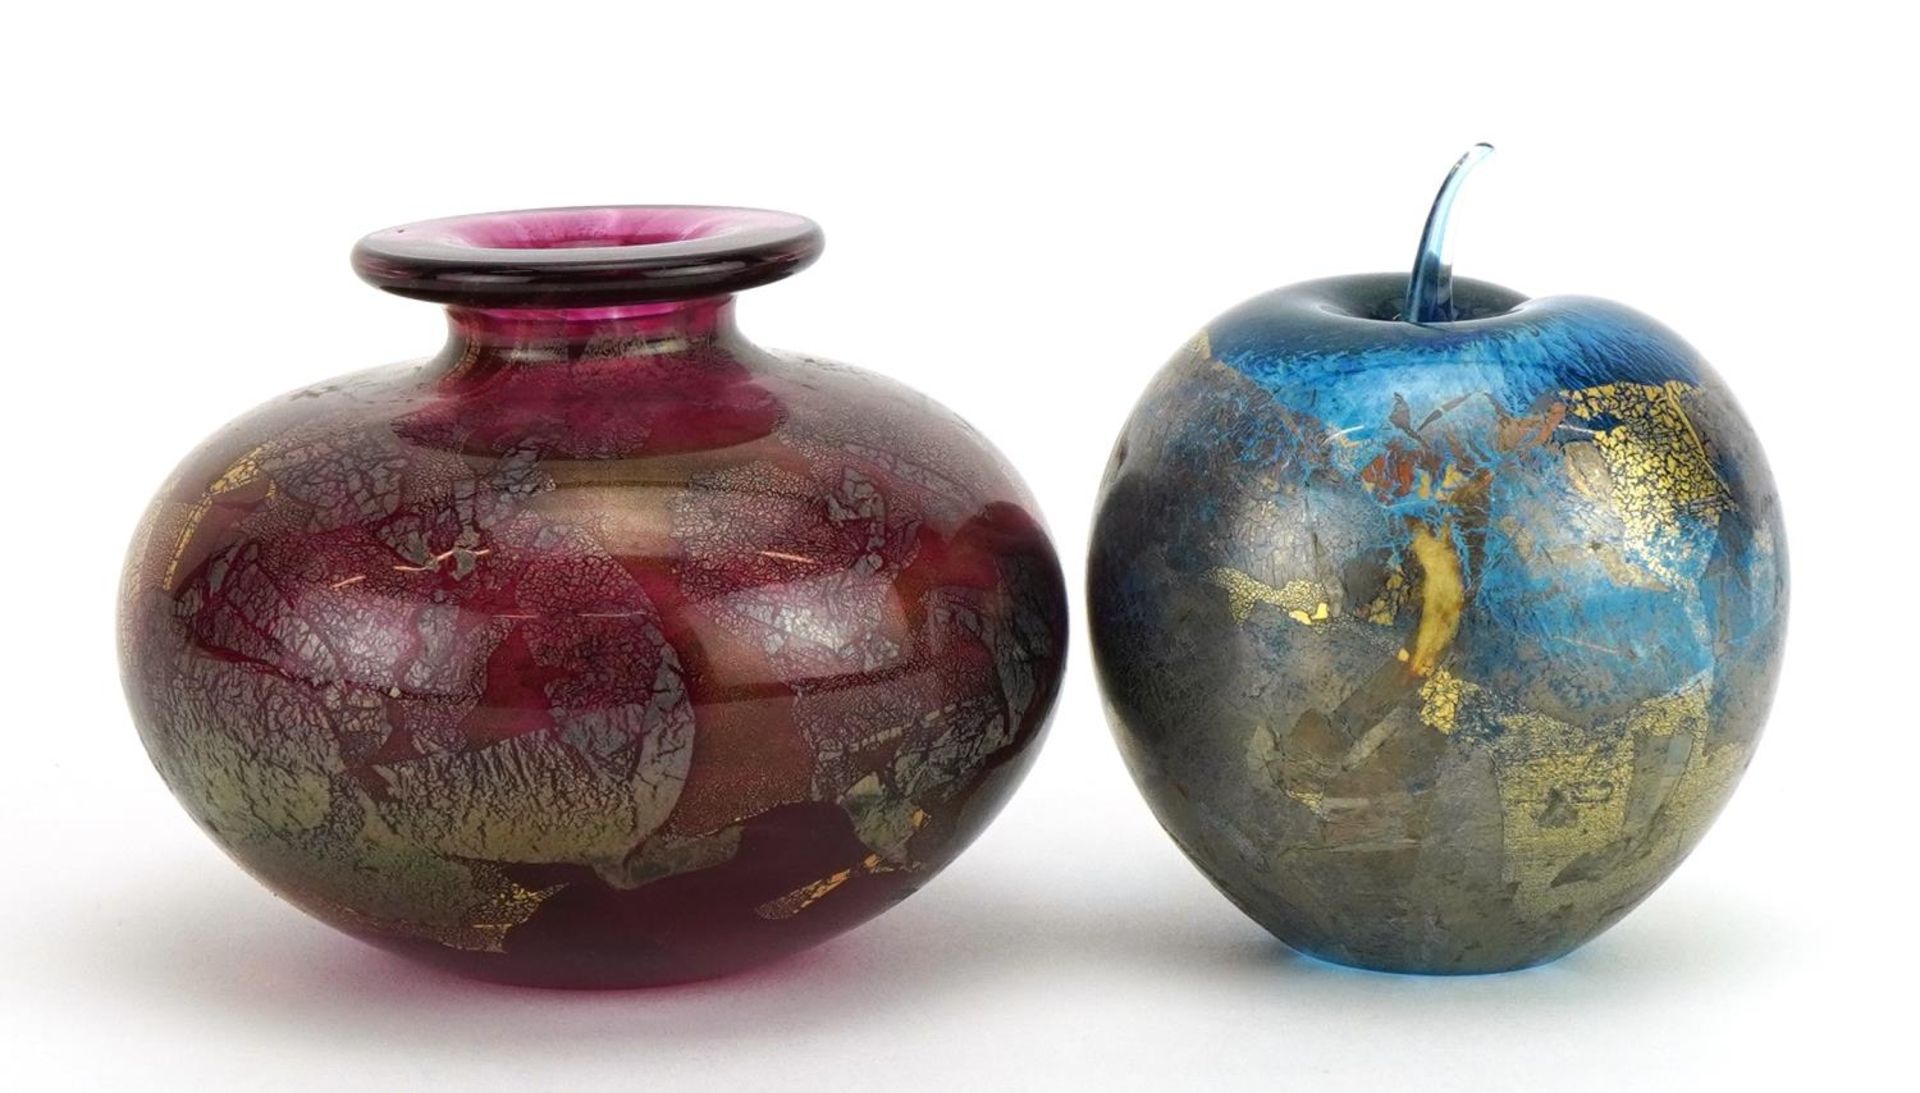 Isle of Wight iridescent art glassware comprising a vase and apple paperweight, each with paper